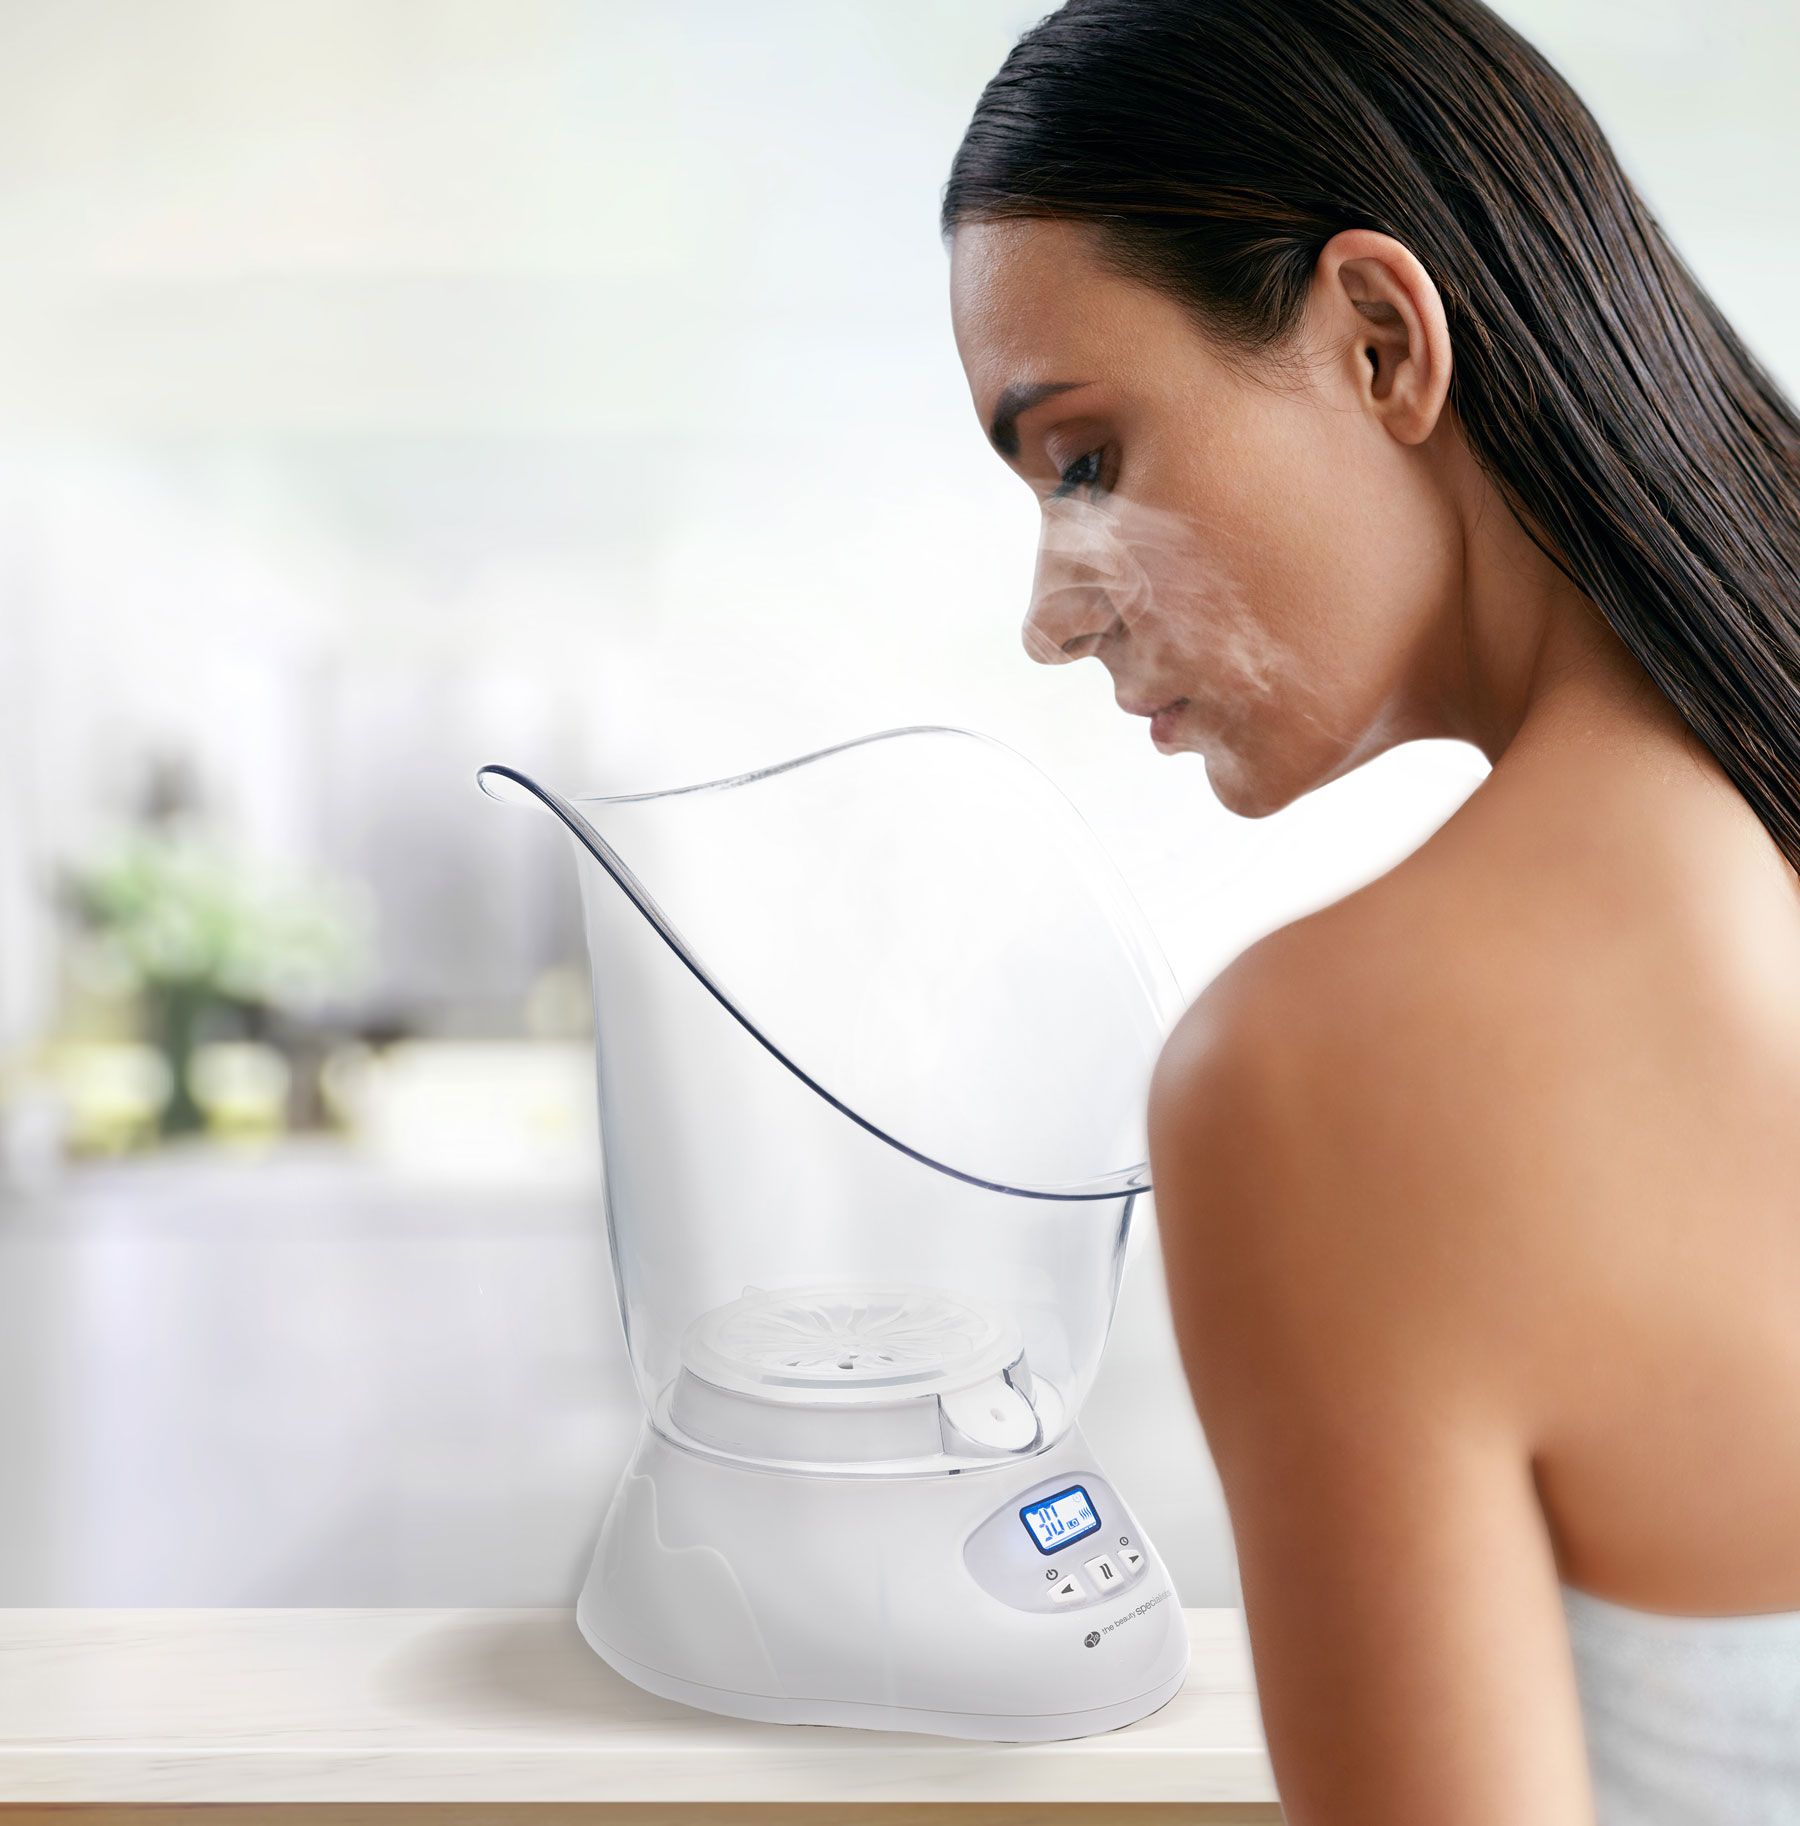 Woman leaning over a facial sauna with steam rising